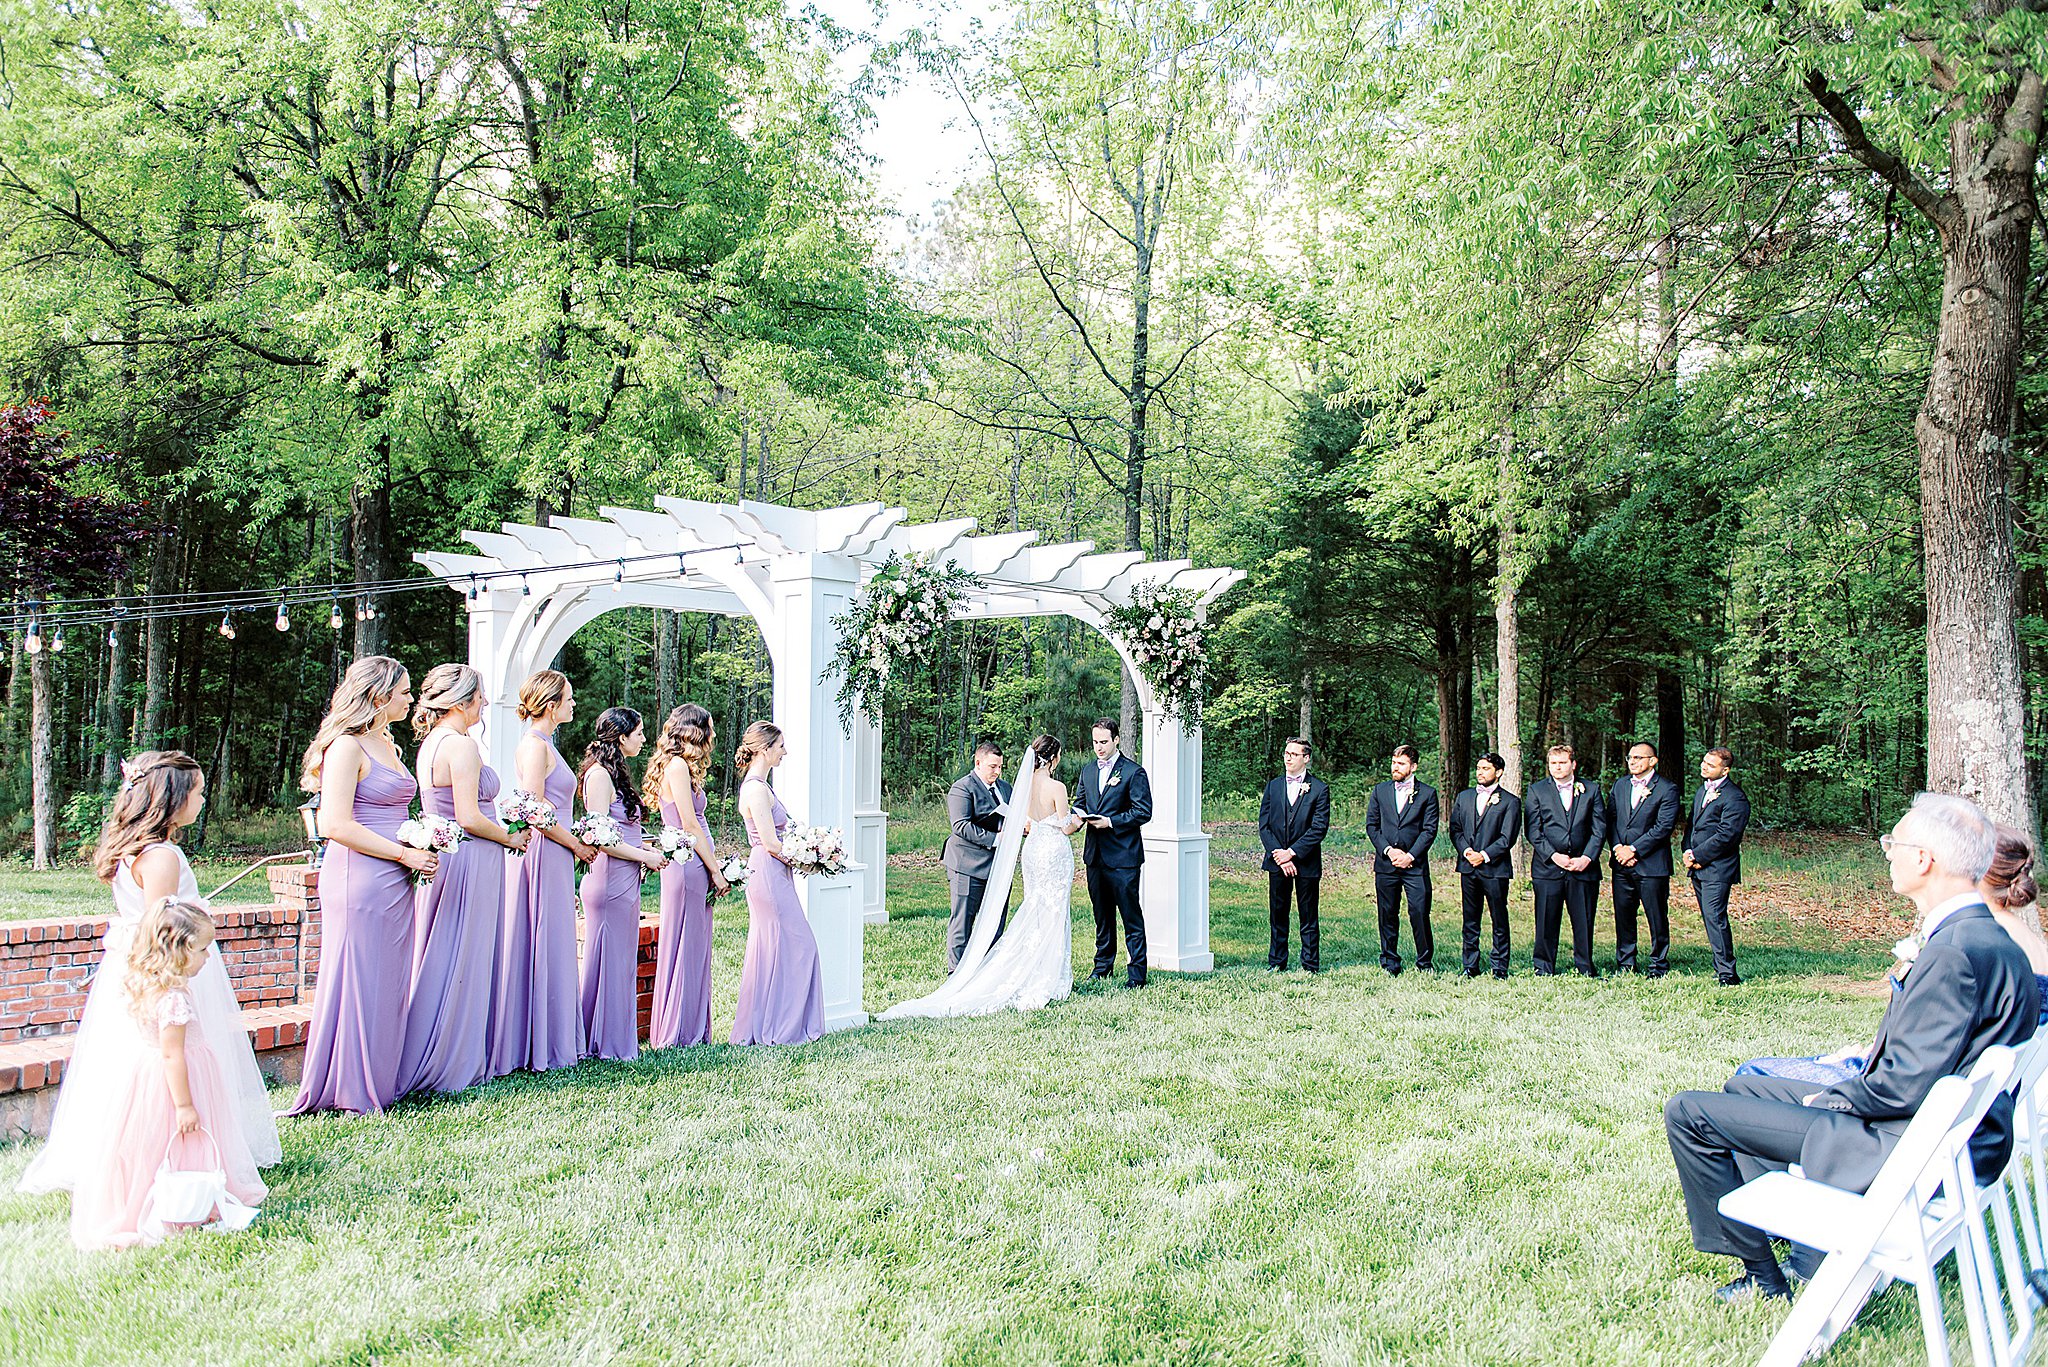 A wedding ceremony with large wedding parties takes place under a white gazebo and tall trees